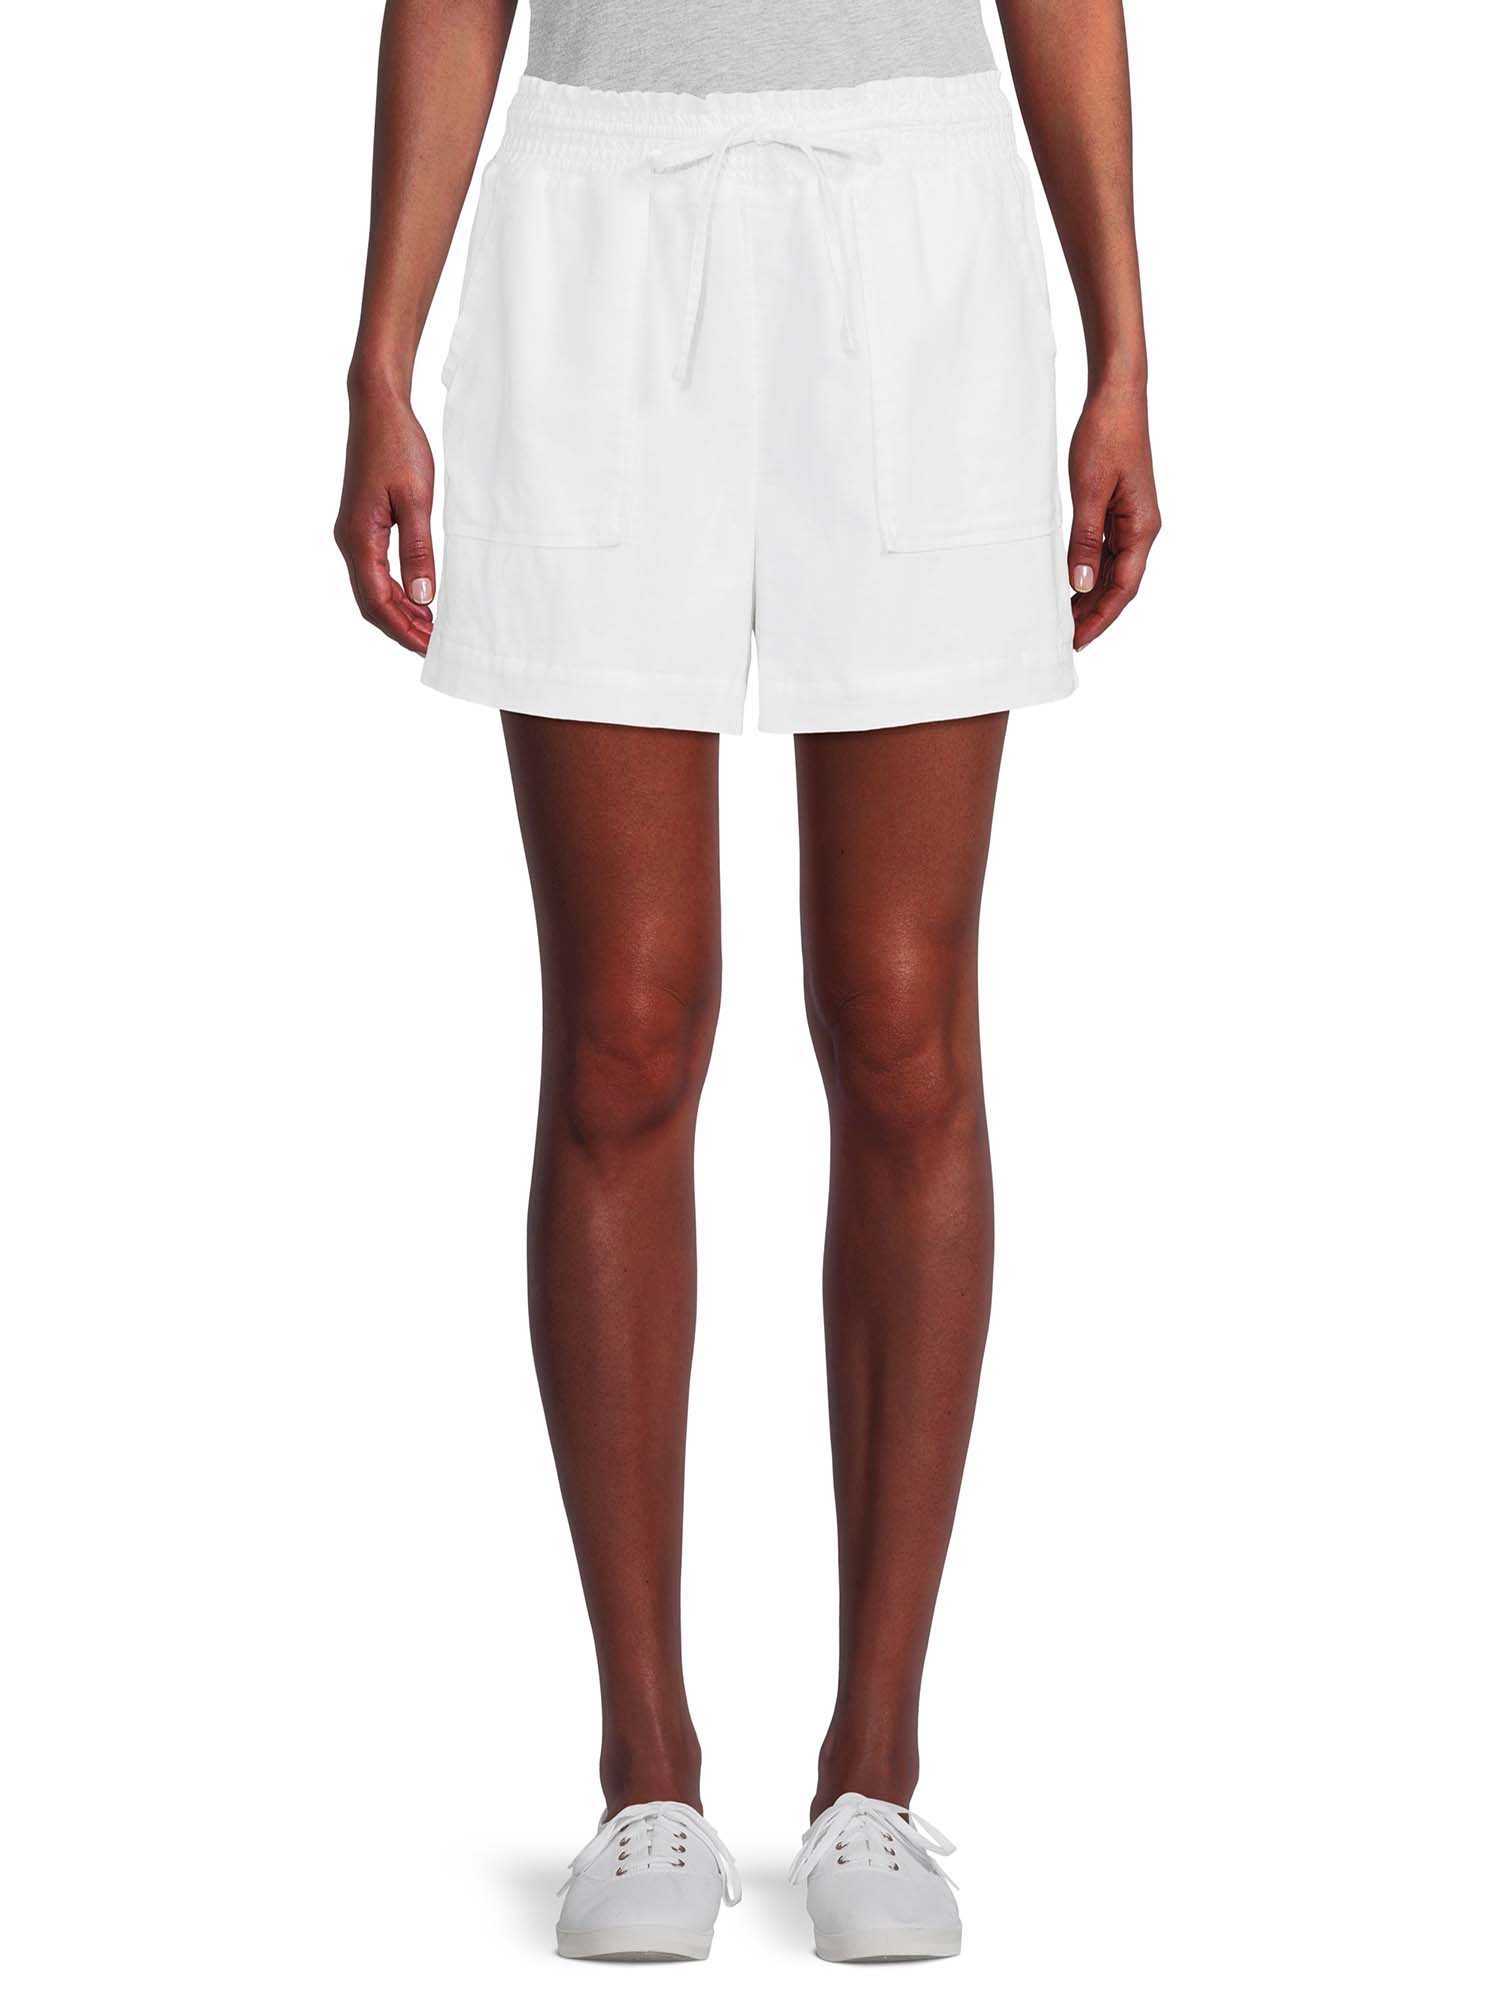 Time and Tru Women's Linen Shorts - image 1 of 5